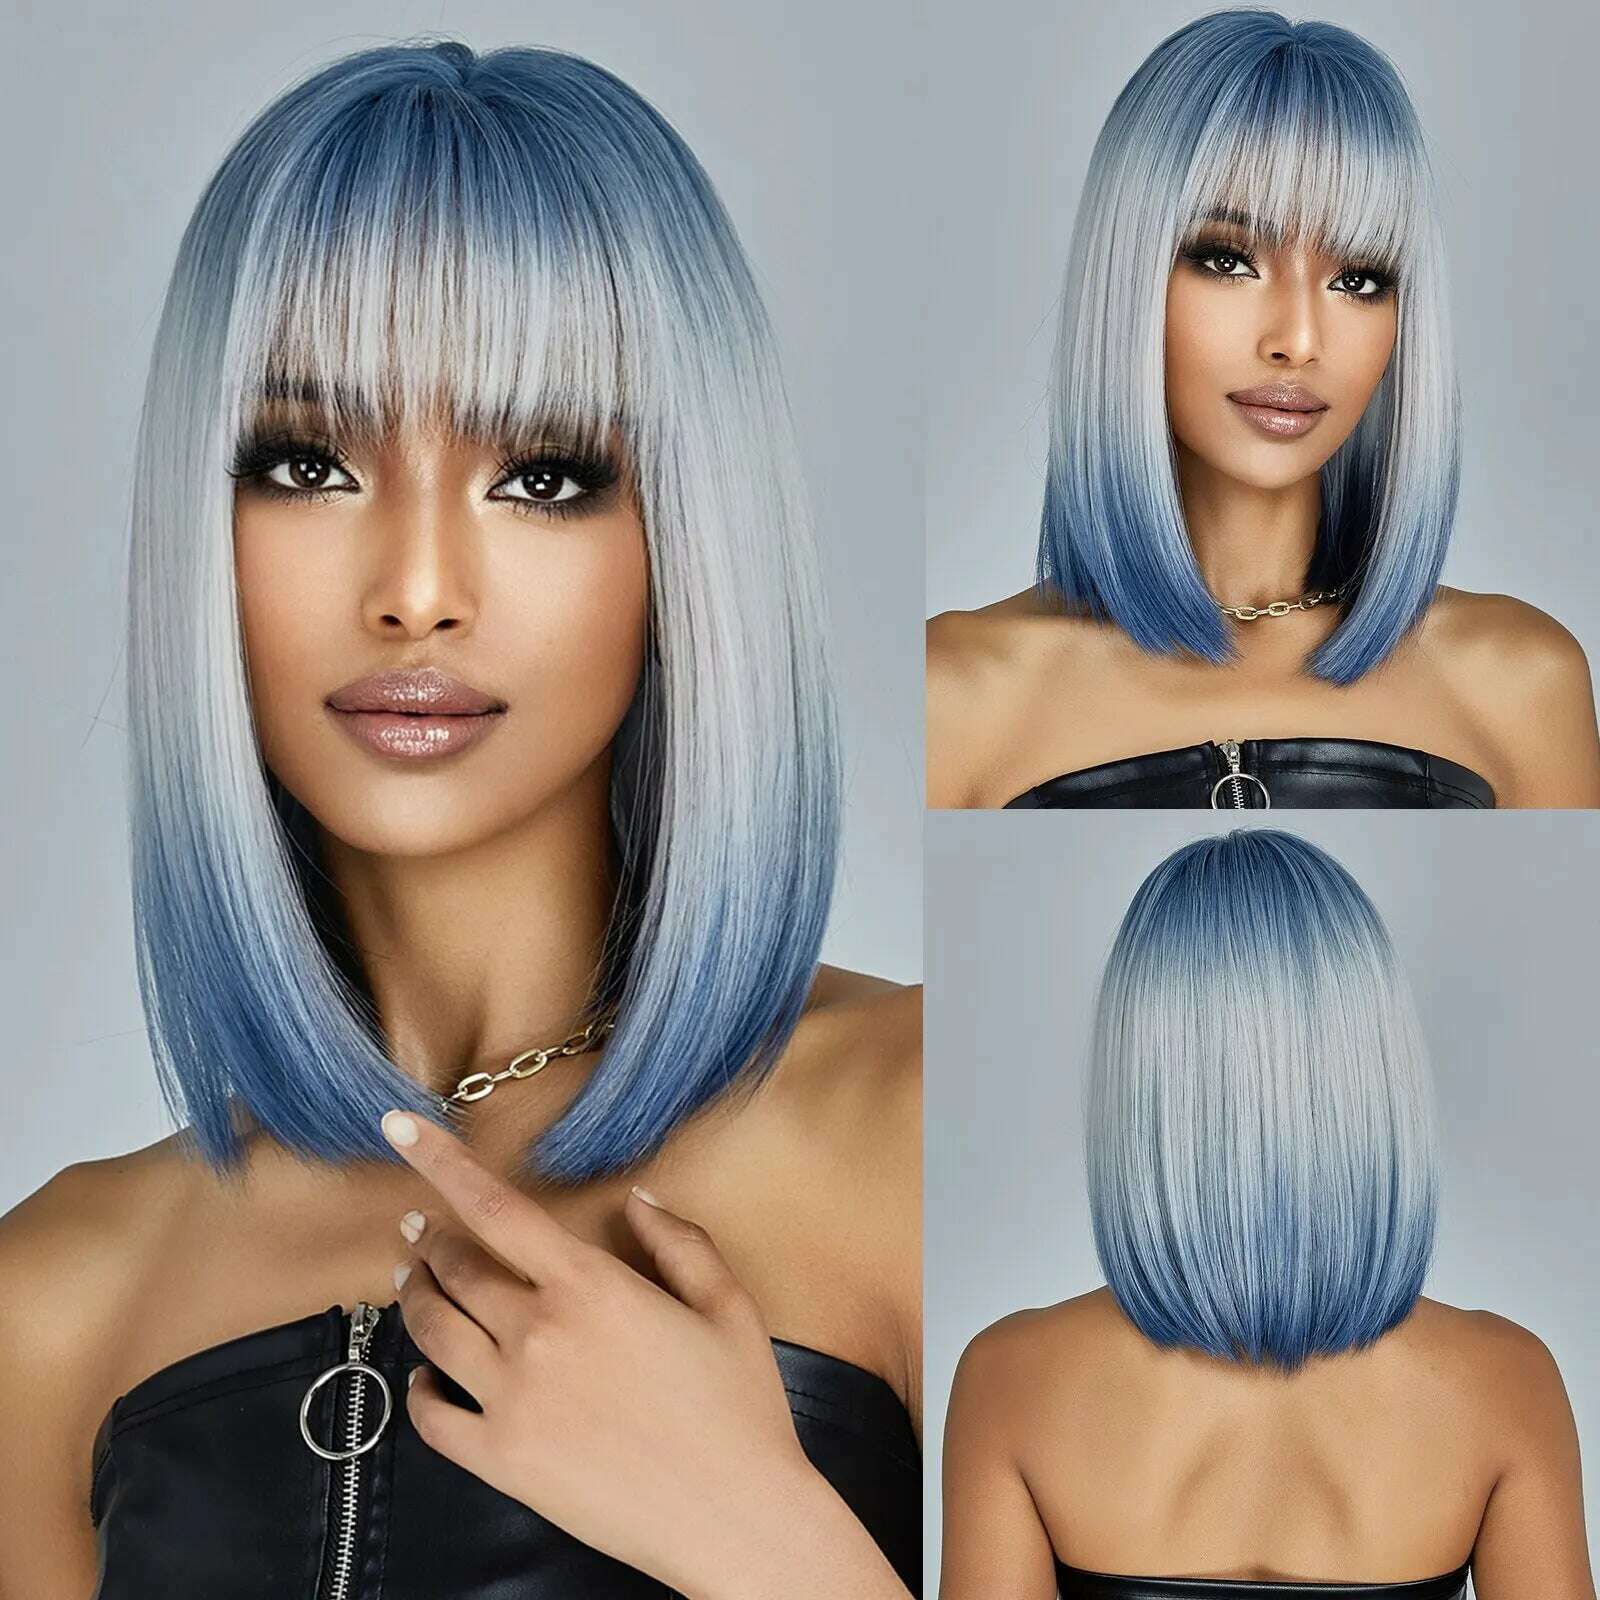 KIMLUD, Medium Length Blue White Ombre Straight Synthetic Hair With Bangs Short Bob Cosplay Wig for Women Daily Party Heat Resistant, WL1138-1, KIMLUD Womens Clothes